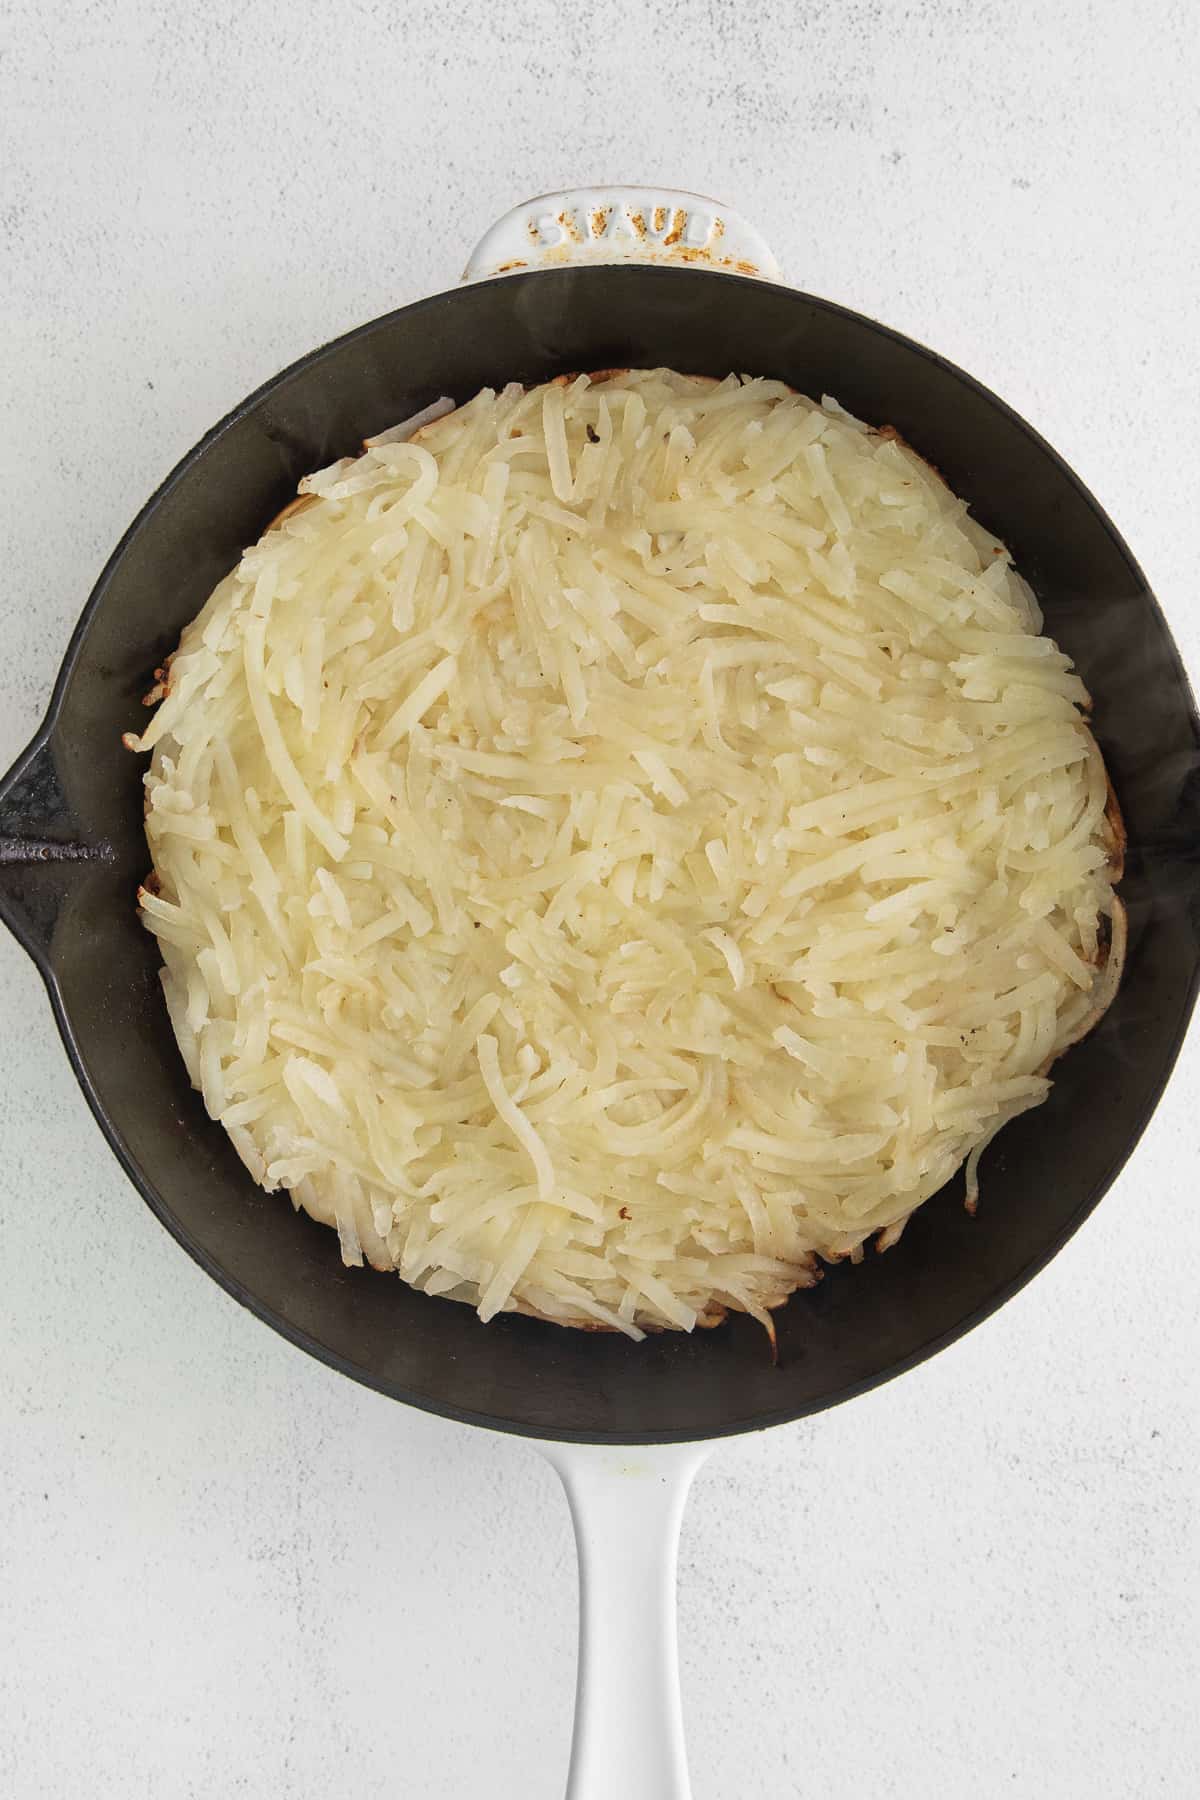 Hash browns in a cast iron skillet.